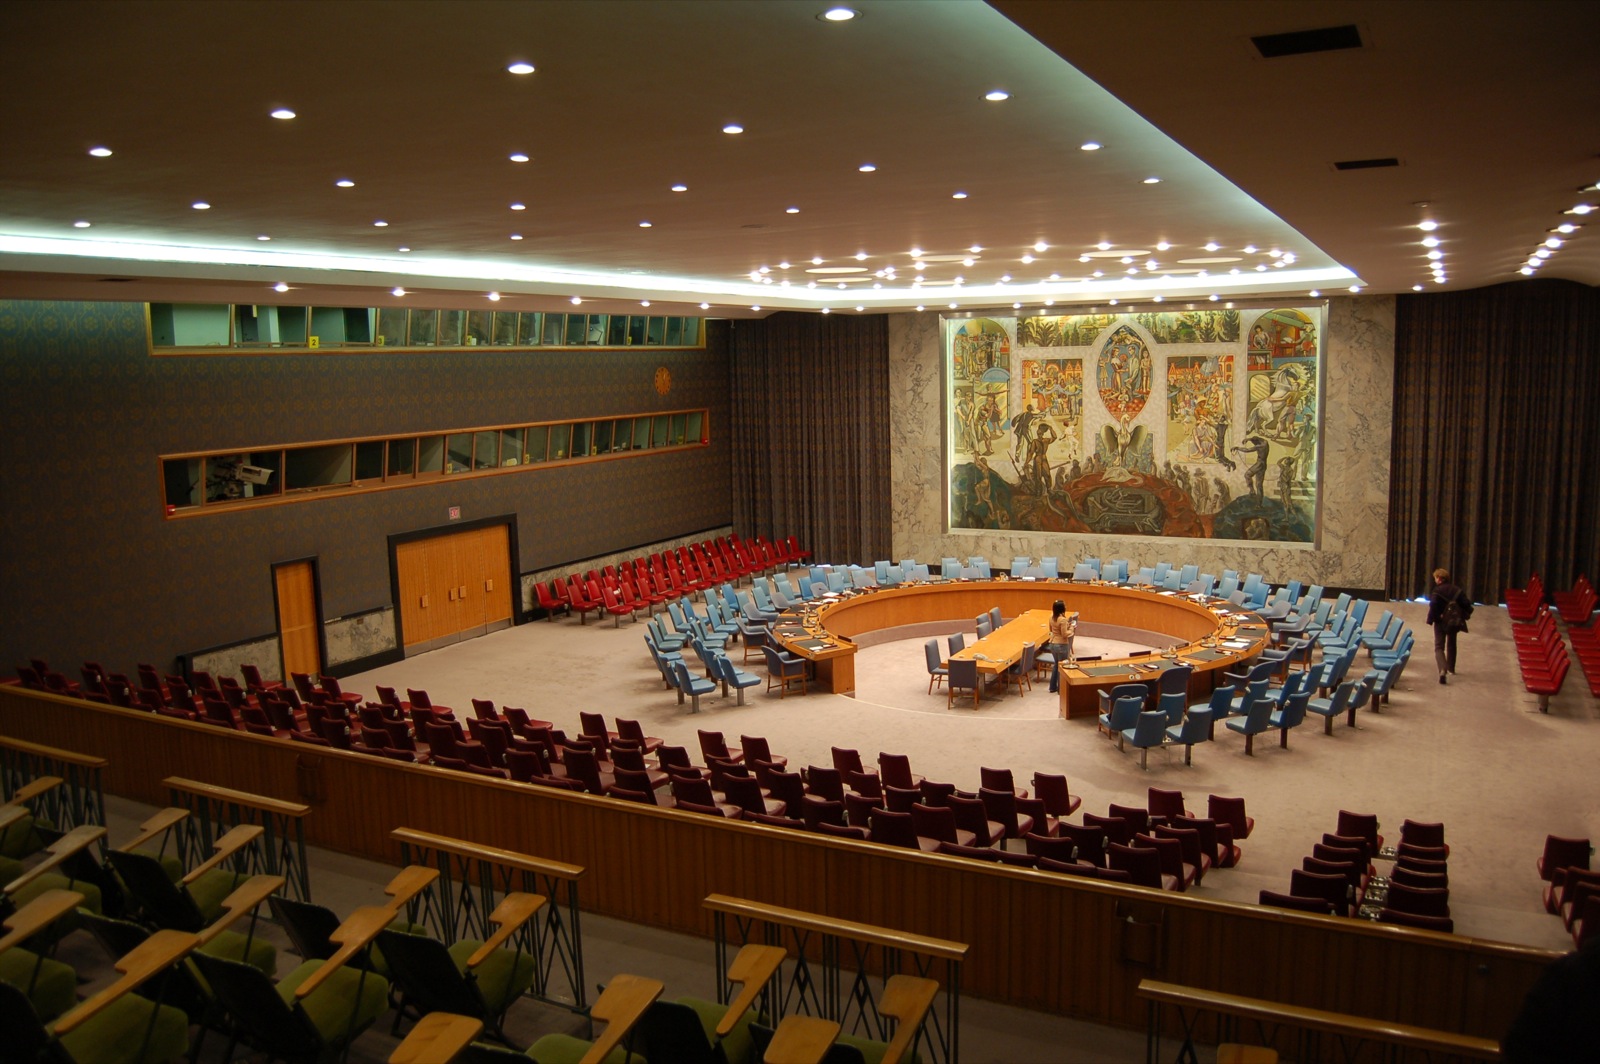 The UN Security Council chamber. Photo: Flickr / Dano